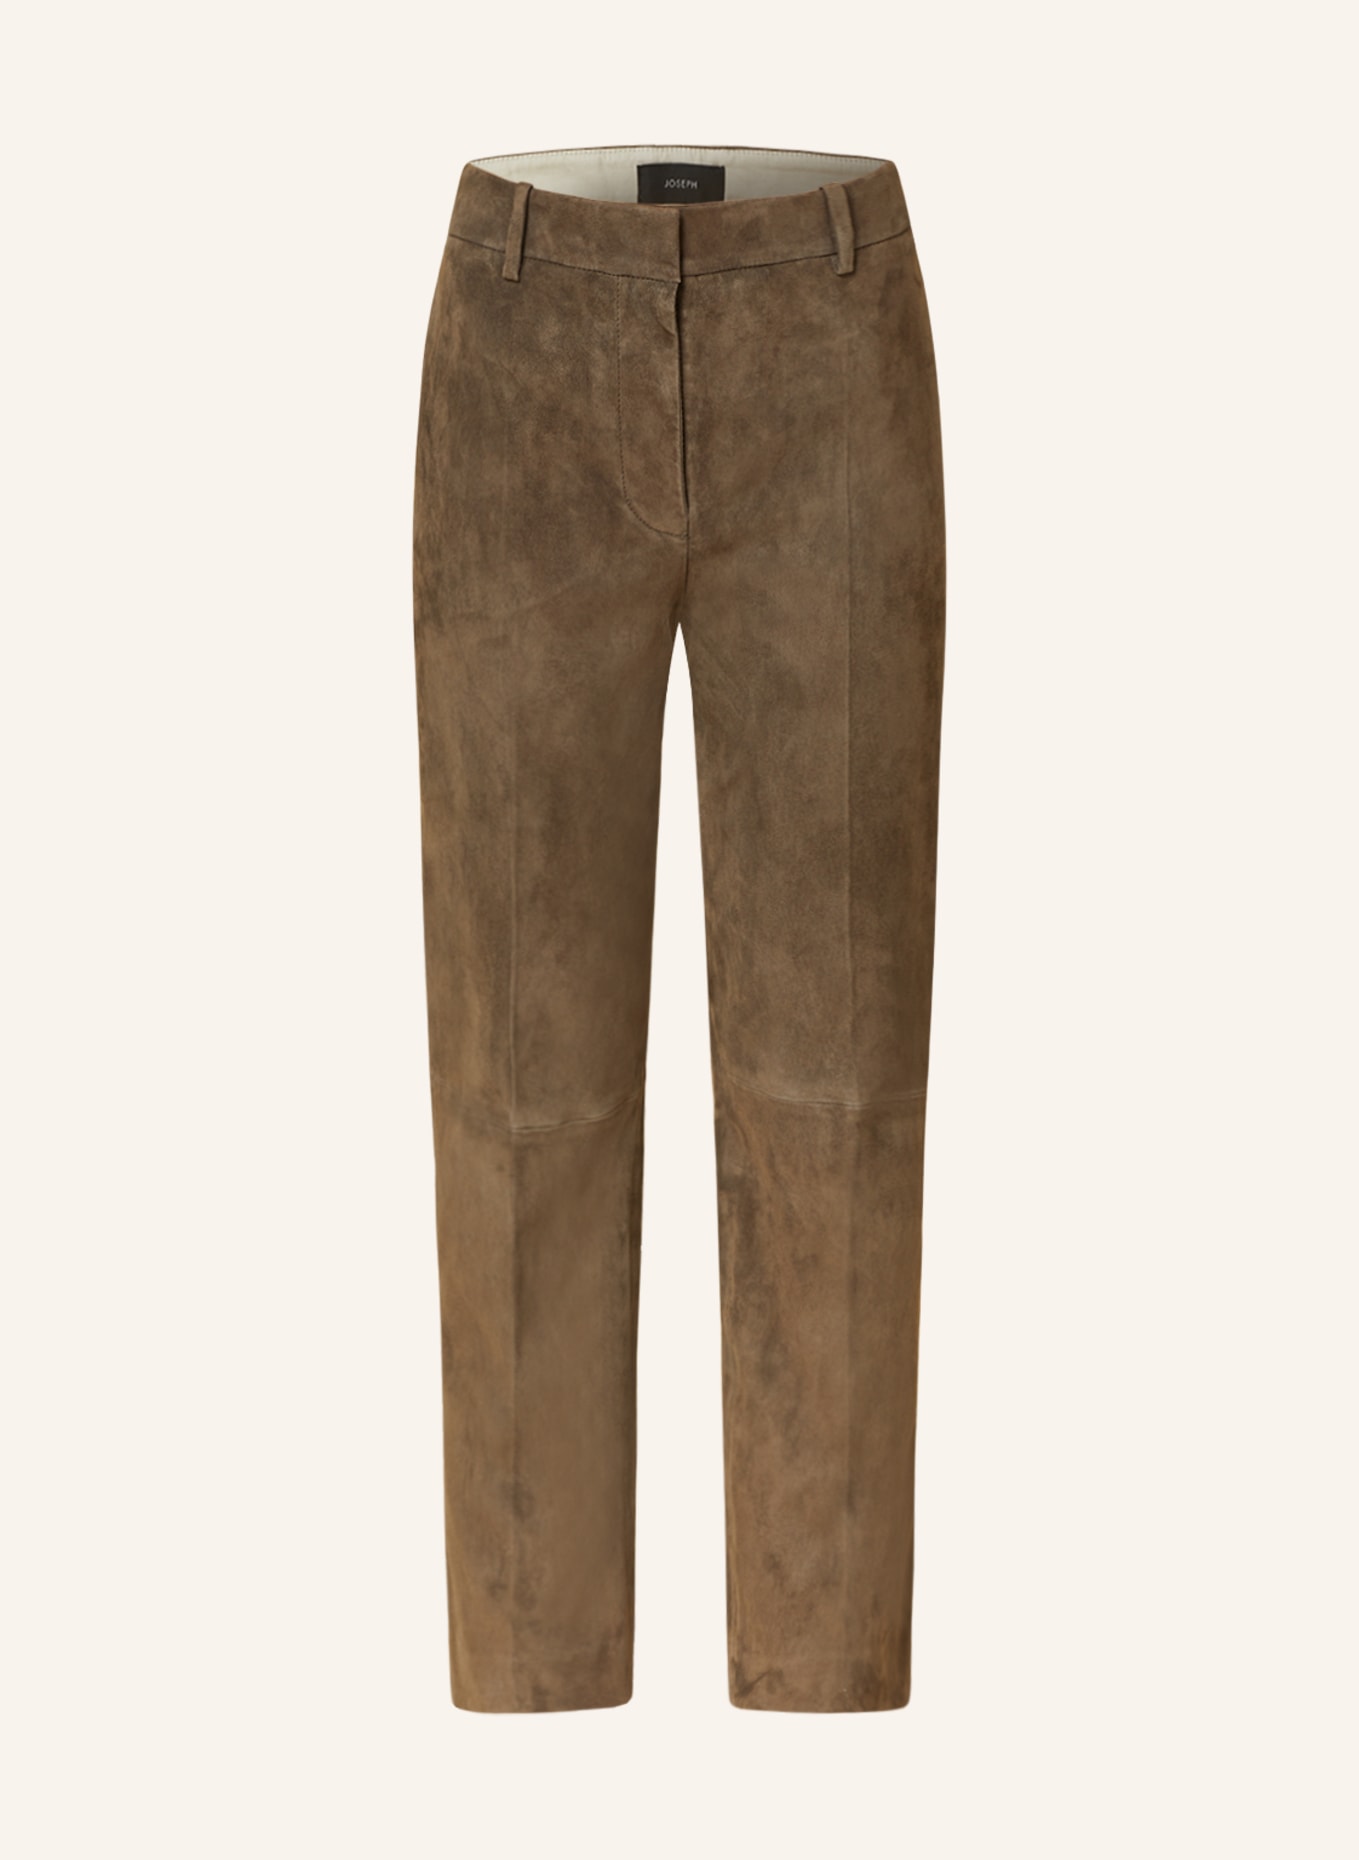 JOSEPH Leather pants COLEMAN in brown